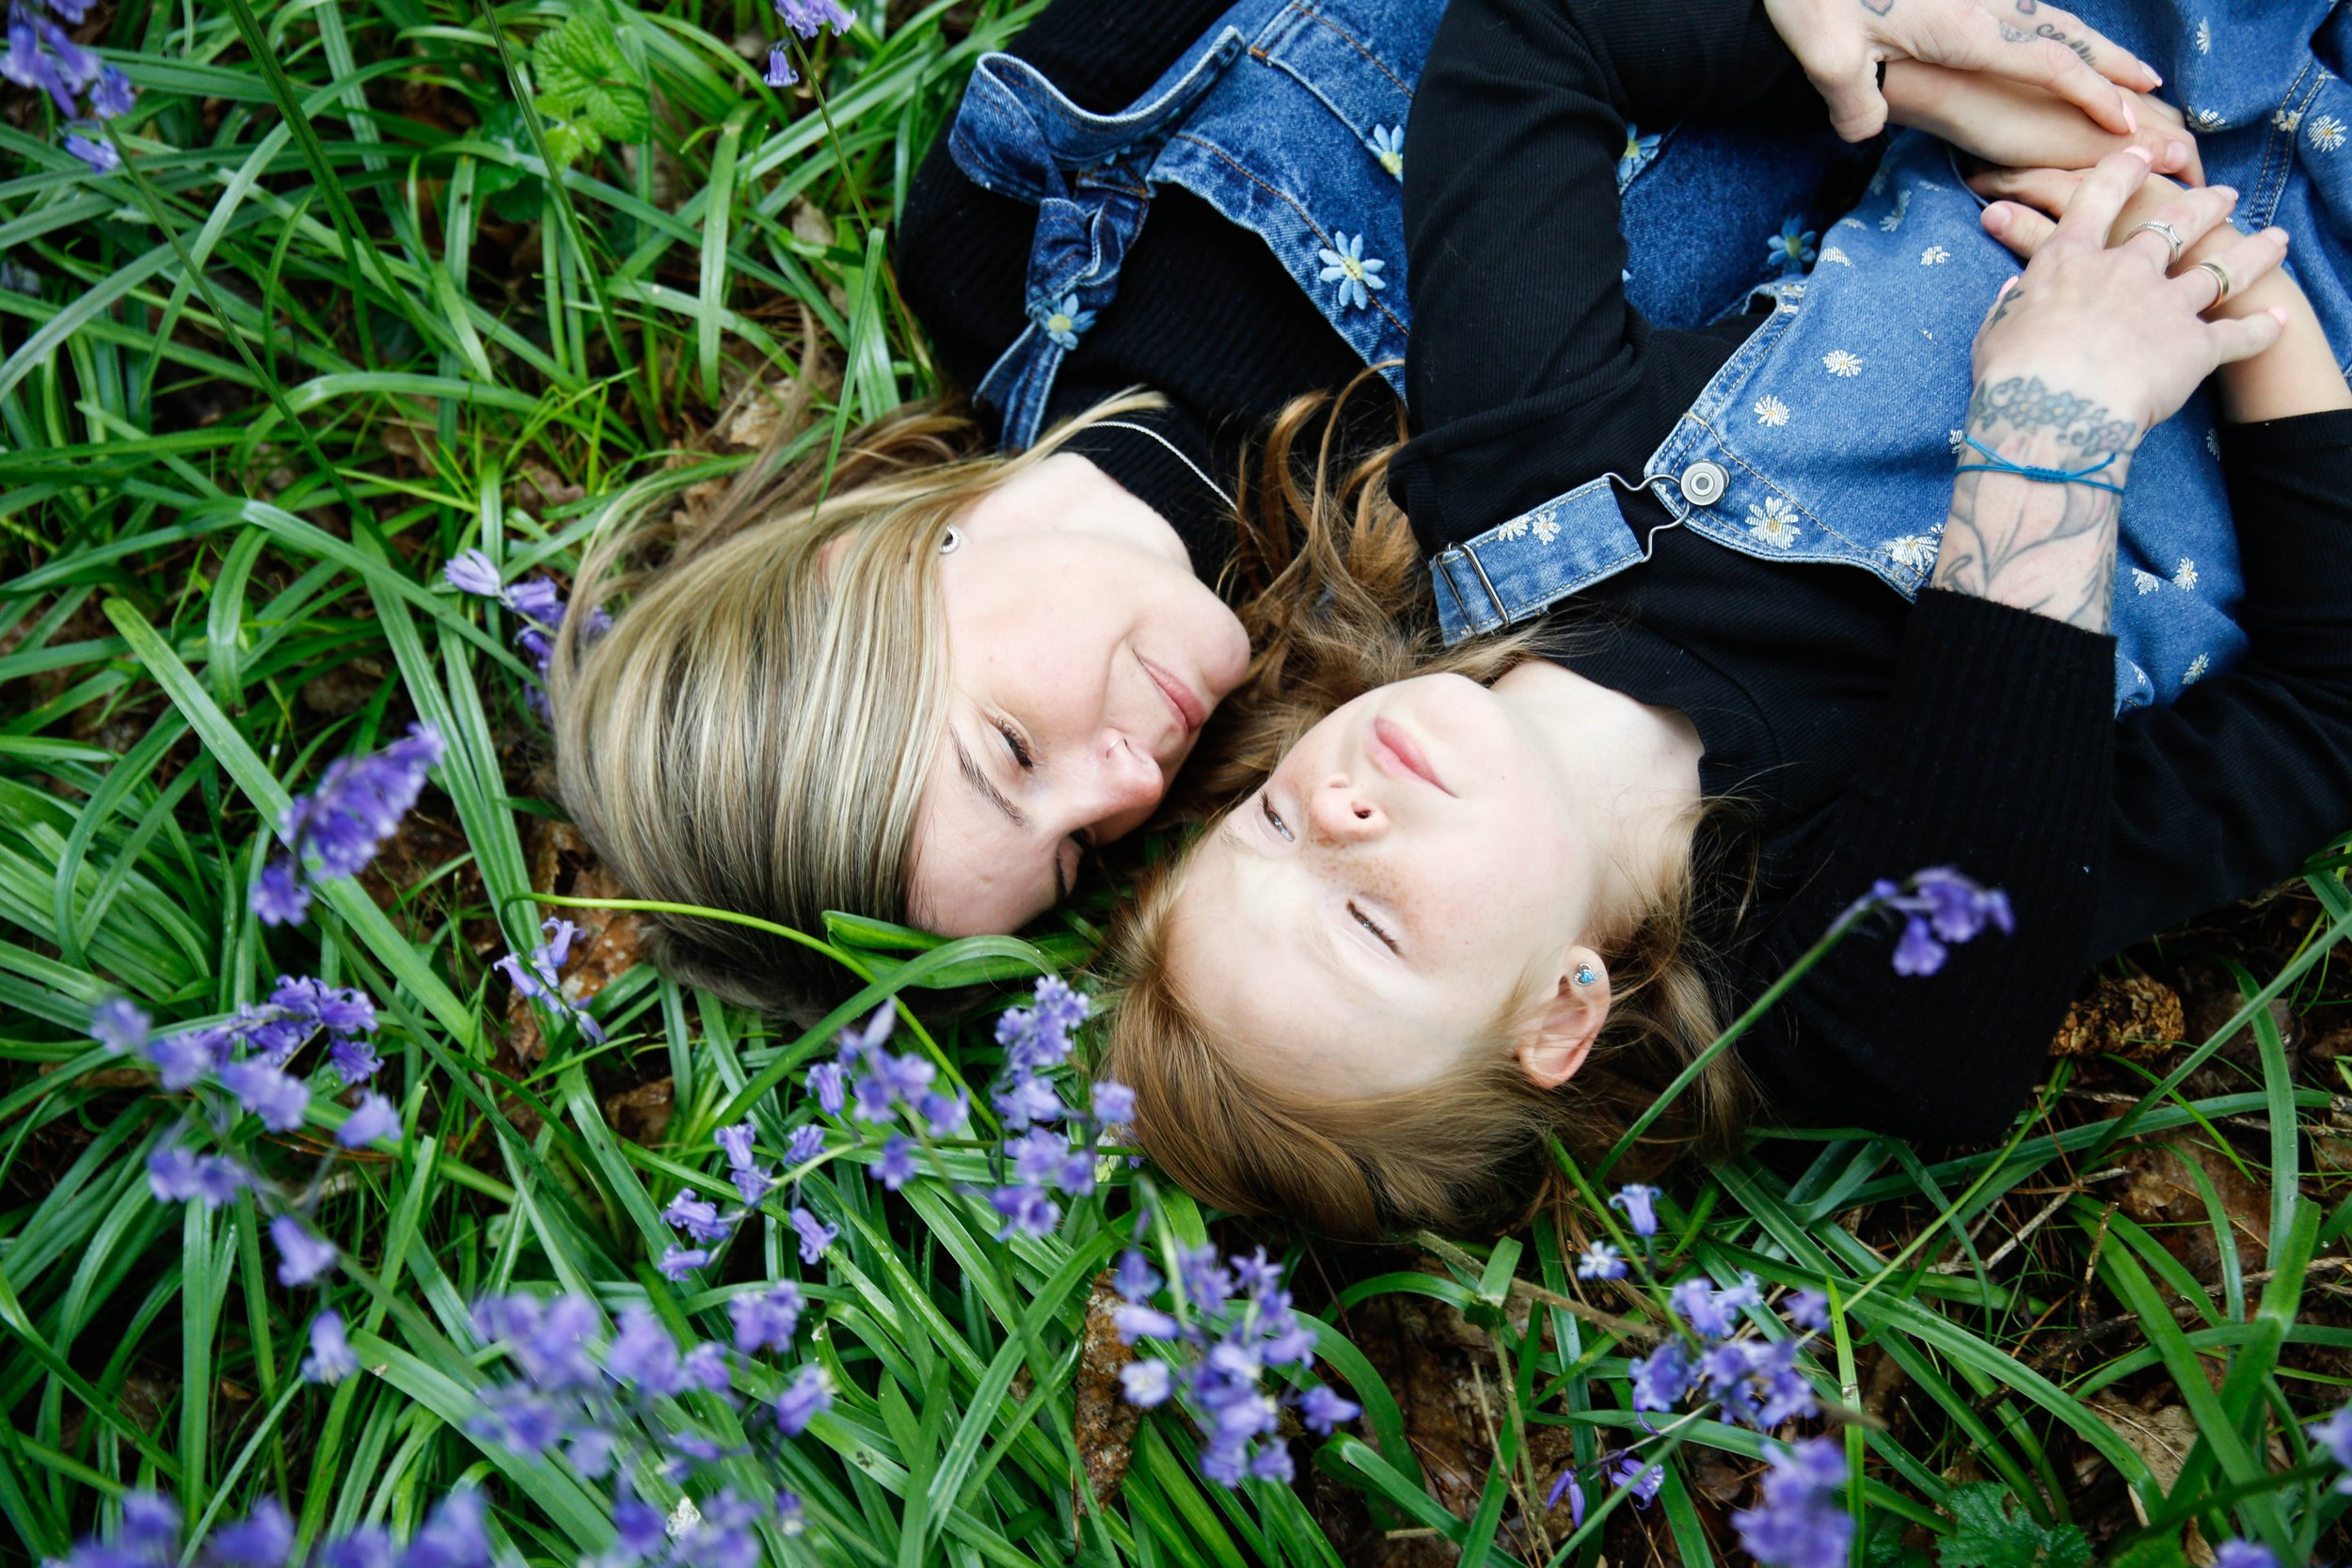 MUM AND DAUGHTER PHOTO SHOOT IN THE BLUEBELLS | BERKSHIRE PORTRAIT SHOOTS19 choice .JPG